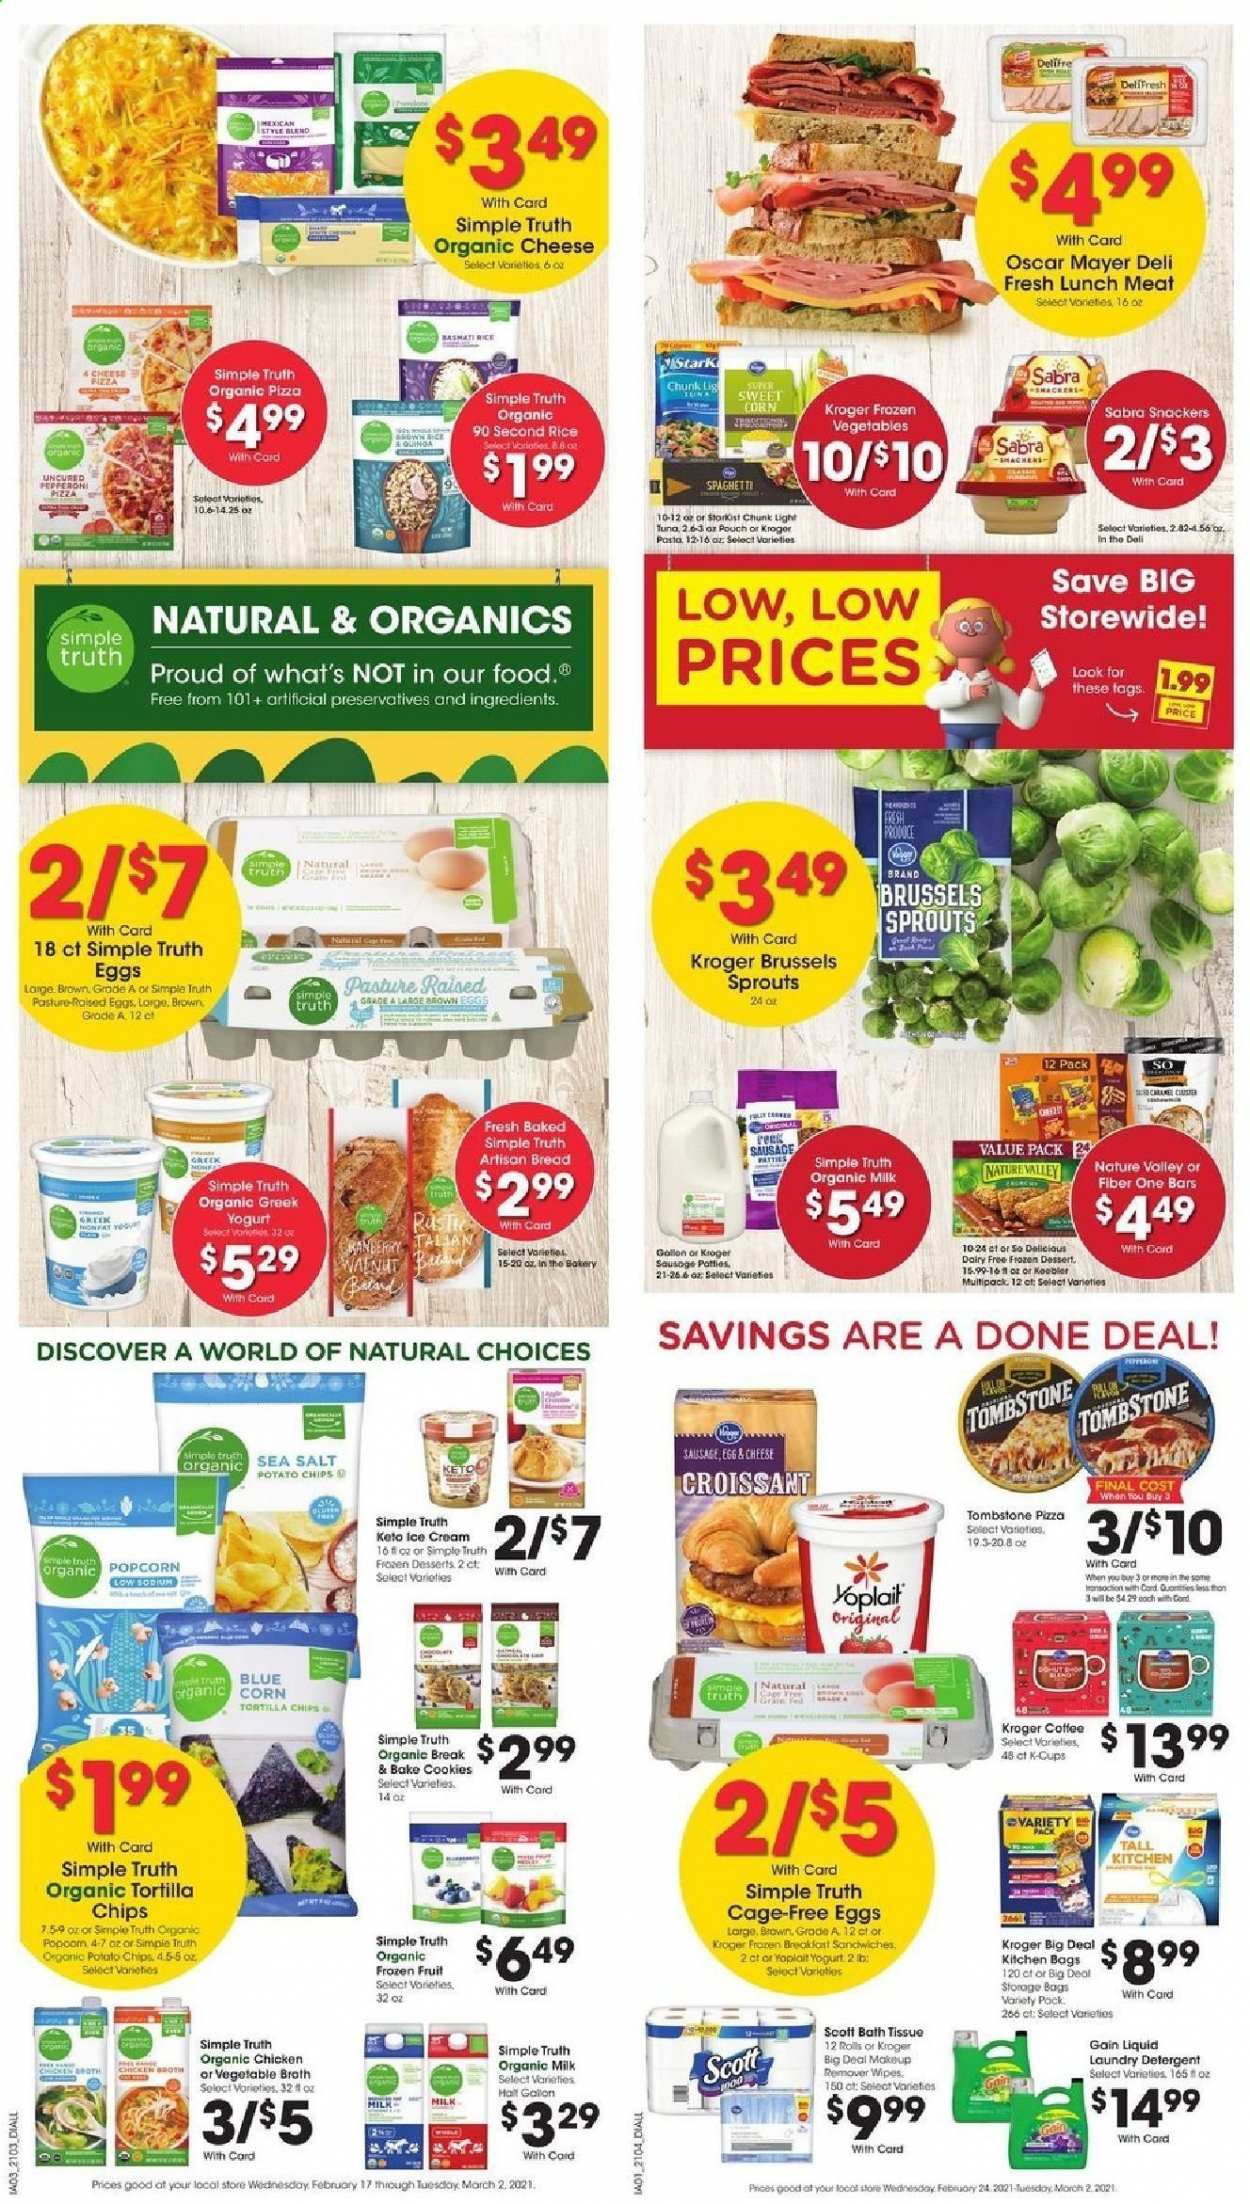 thumbnail - Dillons Flyer - 02/24/2021 - 03/02/2021 - Sales products - bread, croissant, pizza, Oscar Mayer, sausage, lunch meat, greek yoghurt, yoghurt, Yoplait, organic milk, eggs, ice cream, corn, frozen vegetables, organic frozen fruit, brussel sprouts, sweet corn, cookies, Keebler, tortilla chips, potato chips, popcorn, chicken broth, sea salt, broth, light tuna, Nature Valley, Fiber One, rice, spaghetti, pasta, walnuts, coffee capsules, K-Cups, bath tissue, detergent, Gain, wipes, laundry detergent, makeup, makeup remover, cage. Page 6.